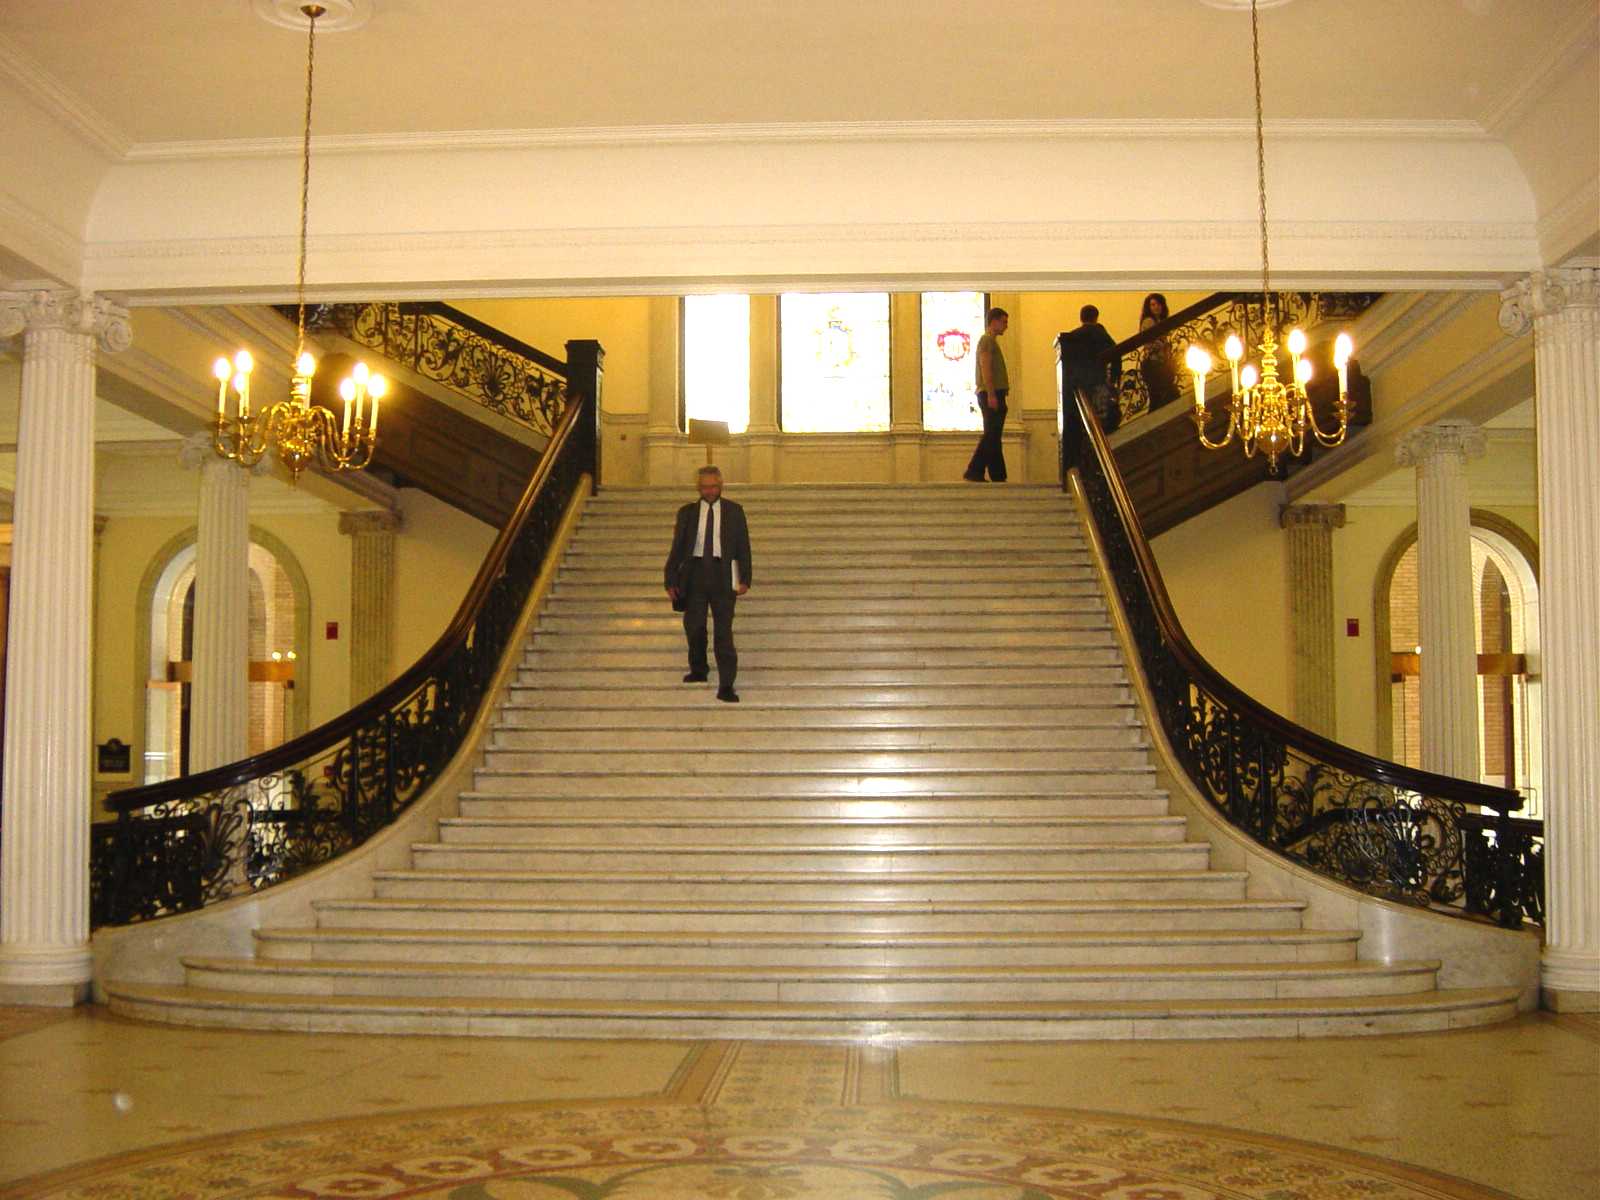 The marble staircase